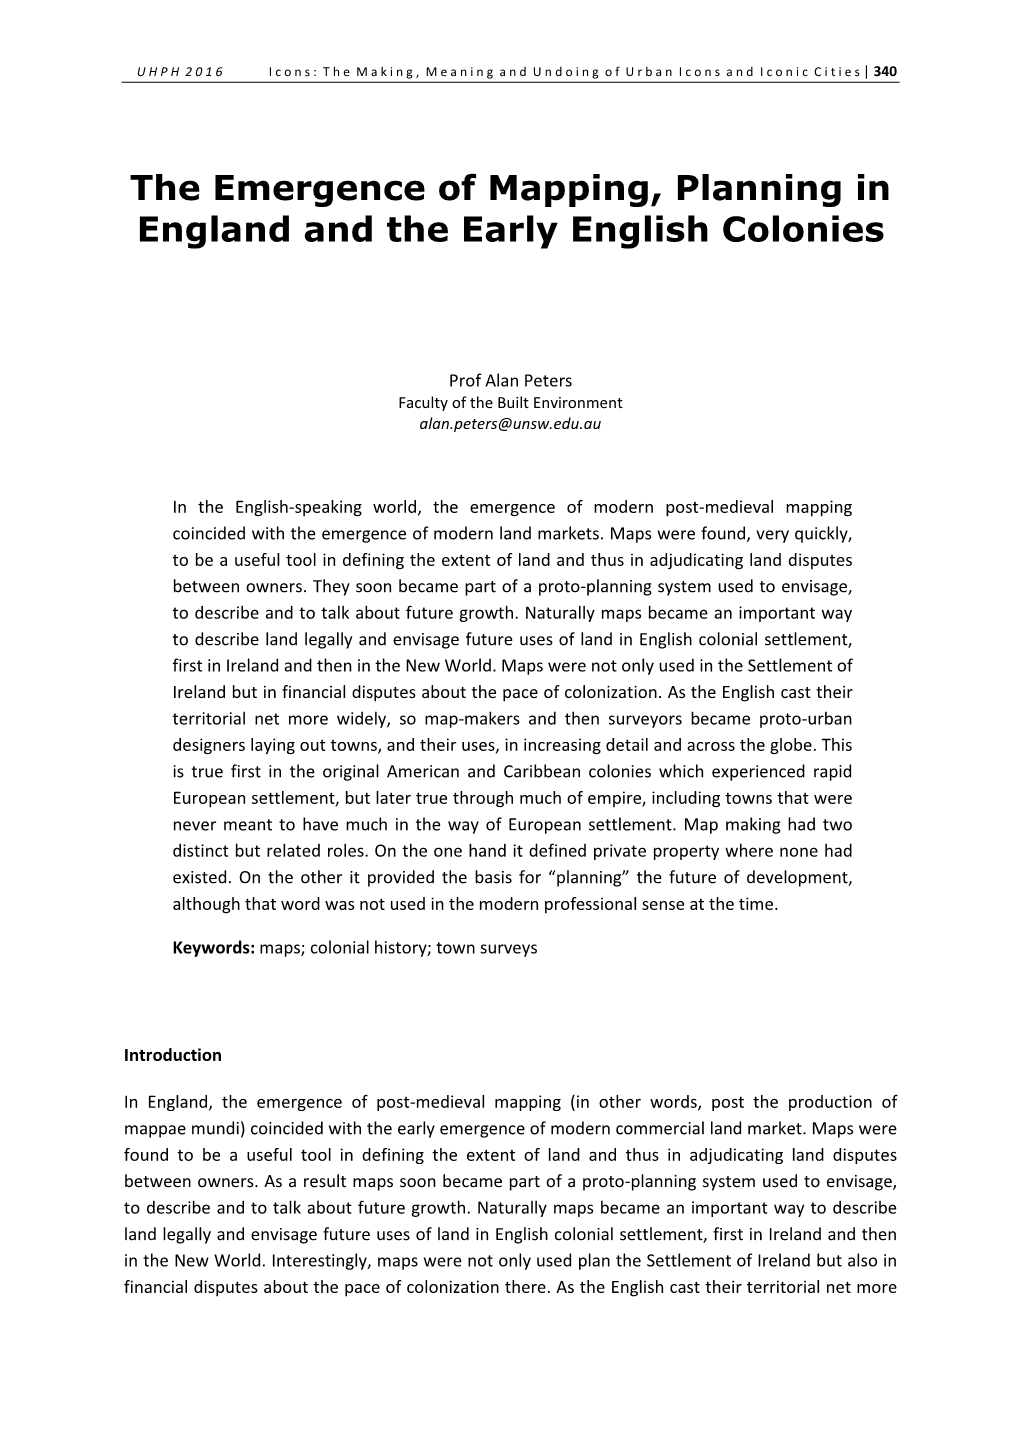 The Emergence of Mapping, Planning in England and the Early English Colonies